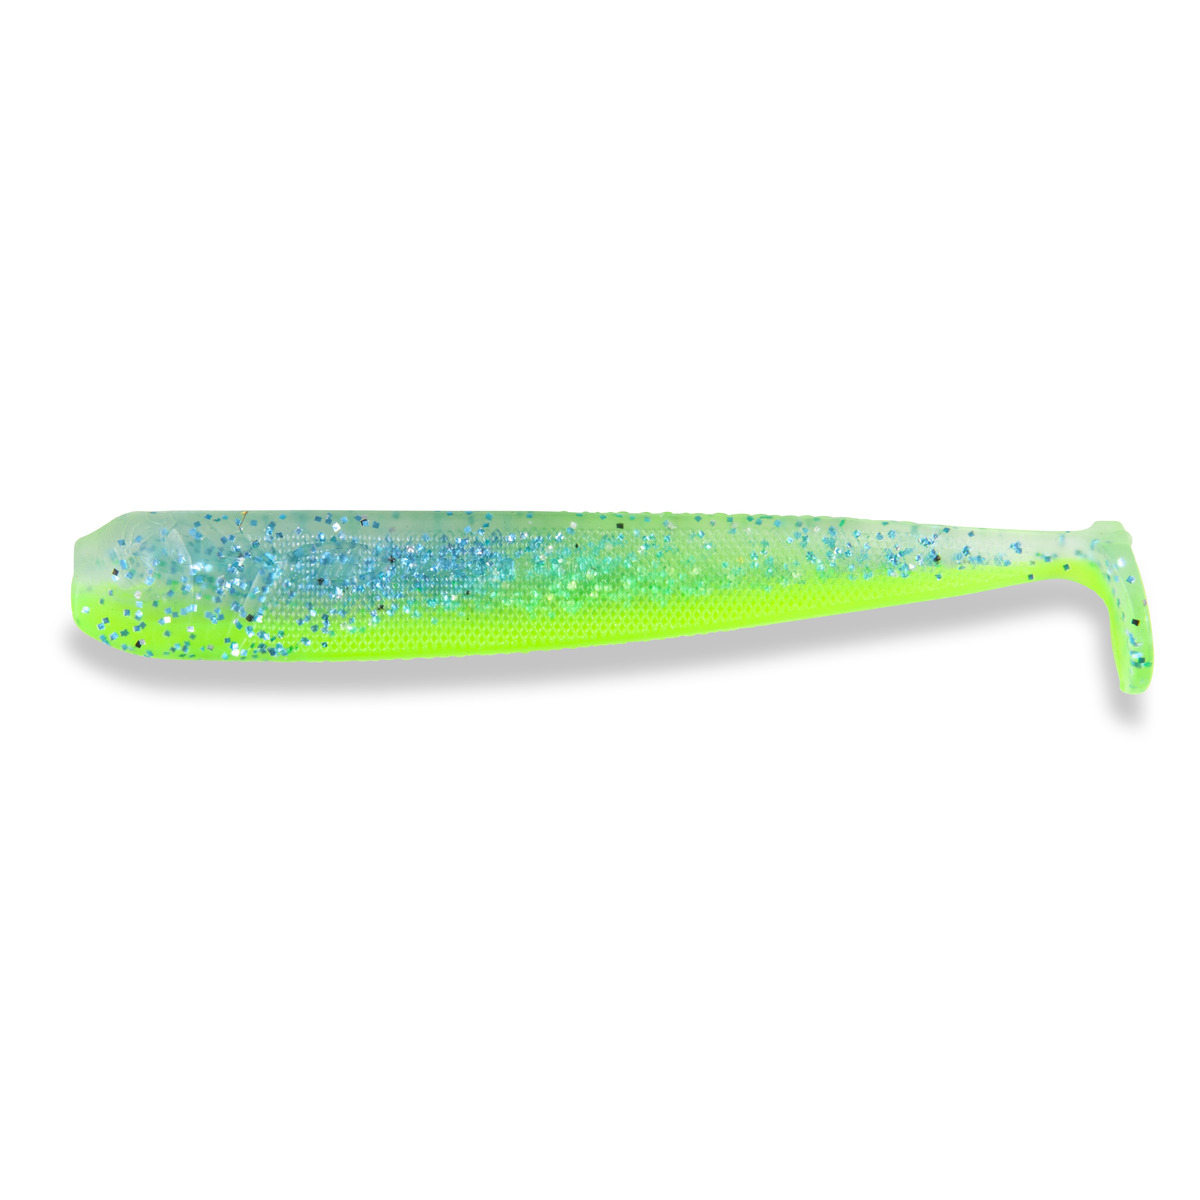 Iron Claw Moby Long Shad 2.0 - MM UV